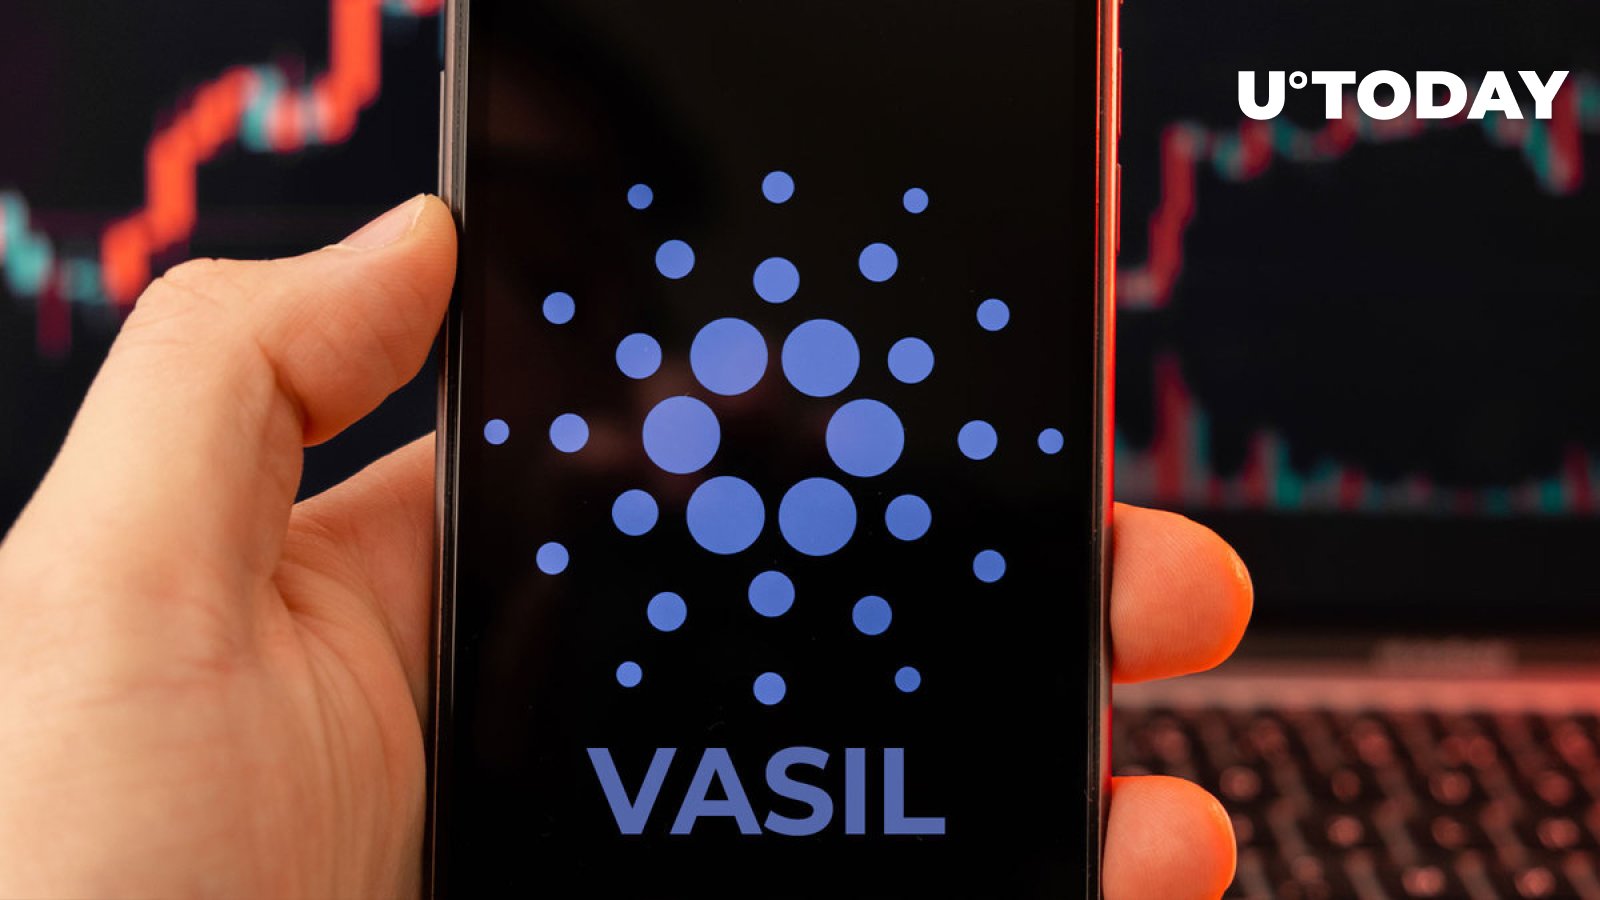 Cardano Users Can Now Track Vasil’s Progress in Real Time on This Newly Launched Platform: Details